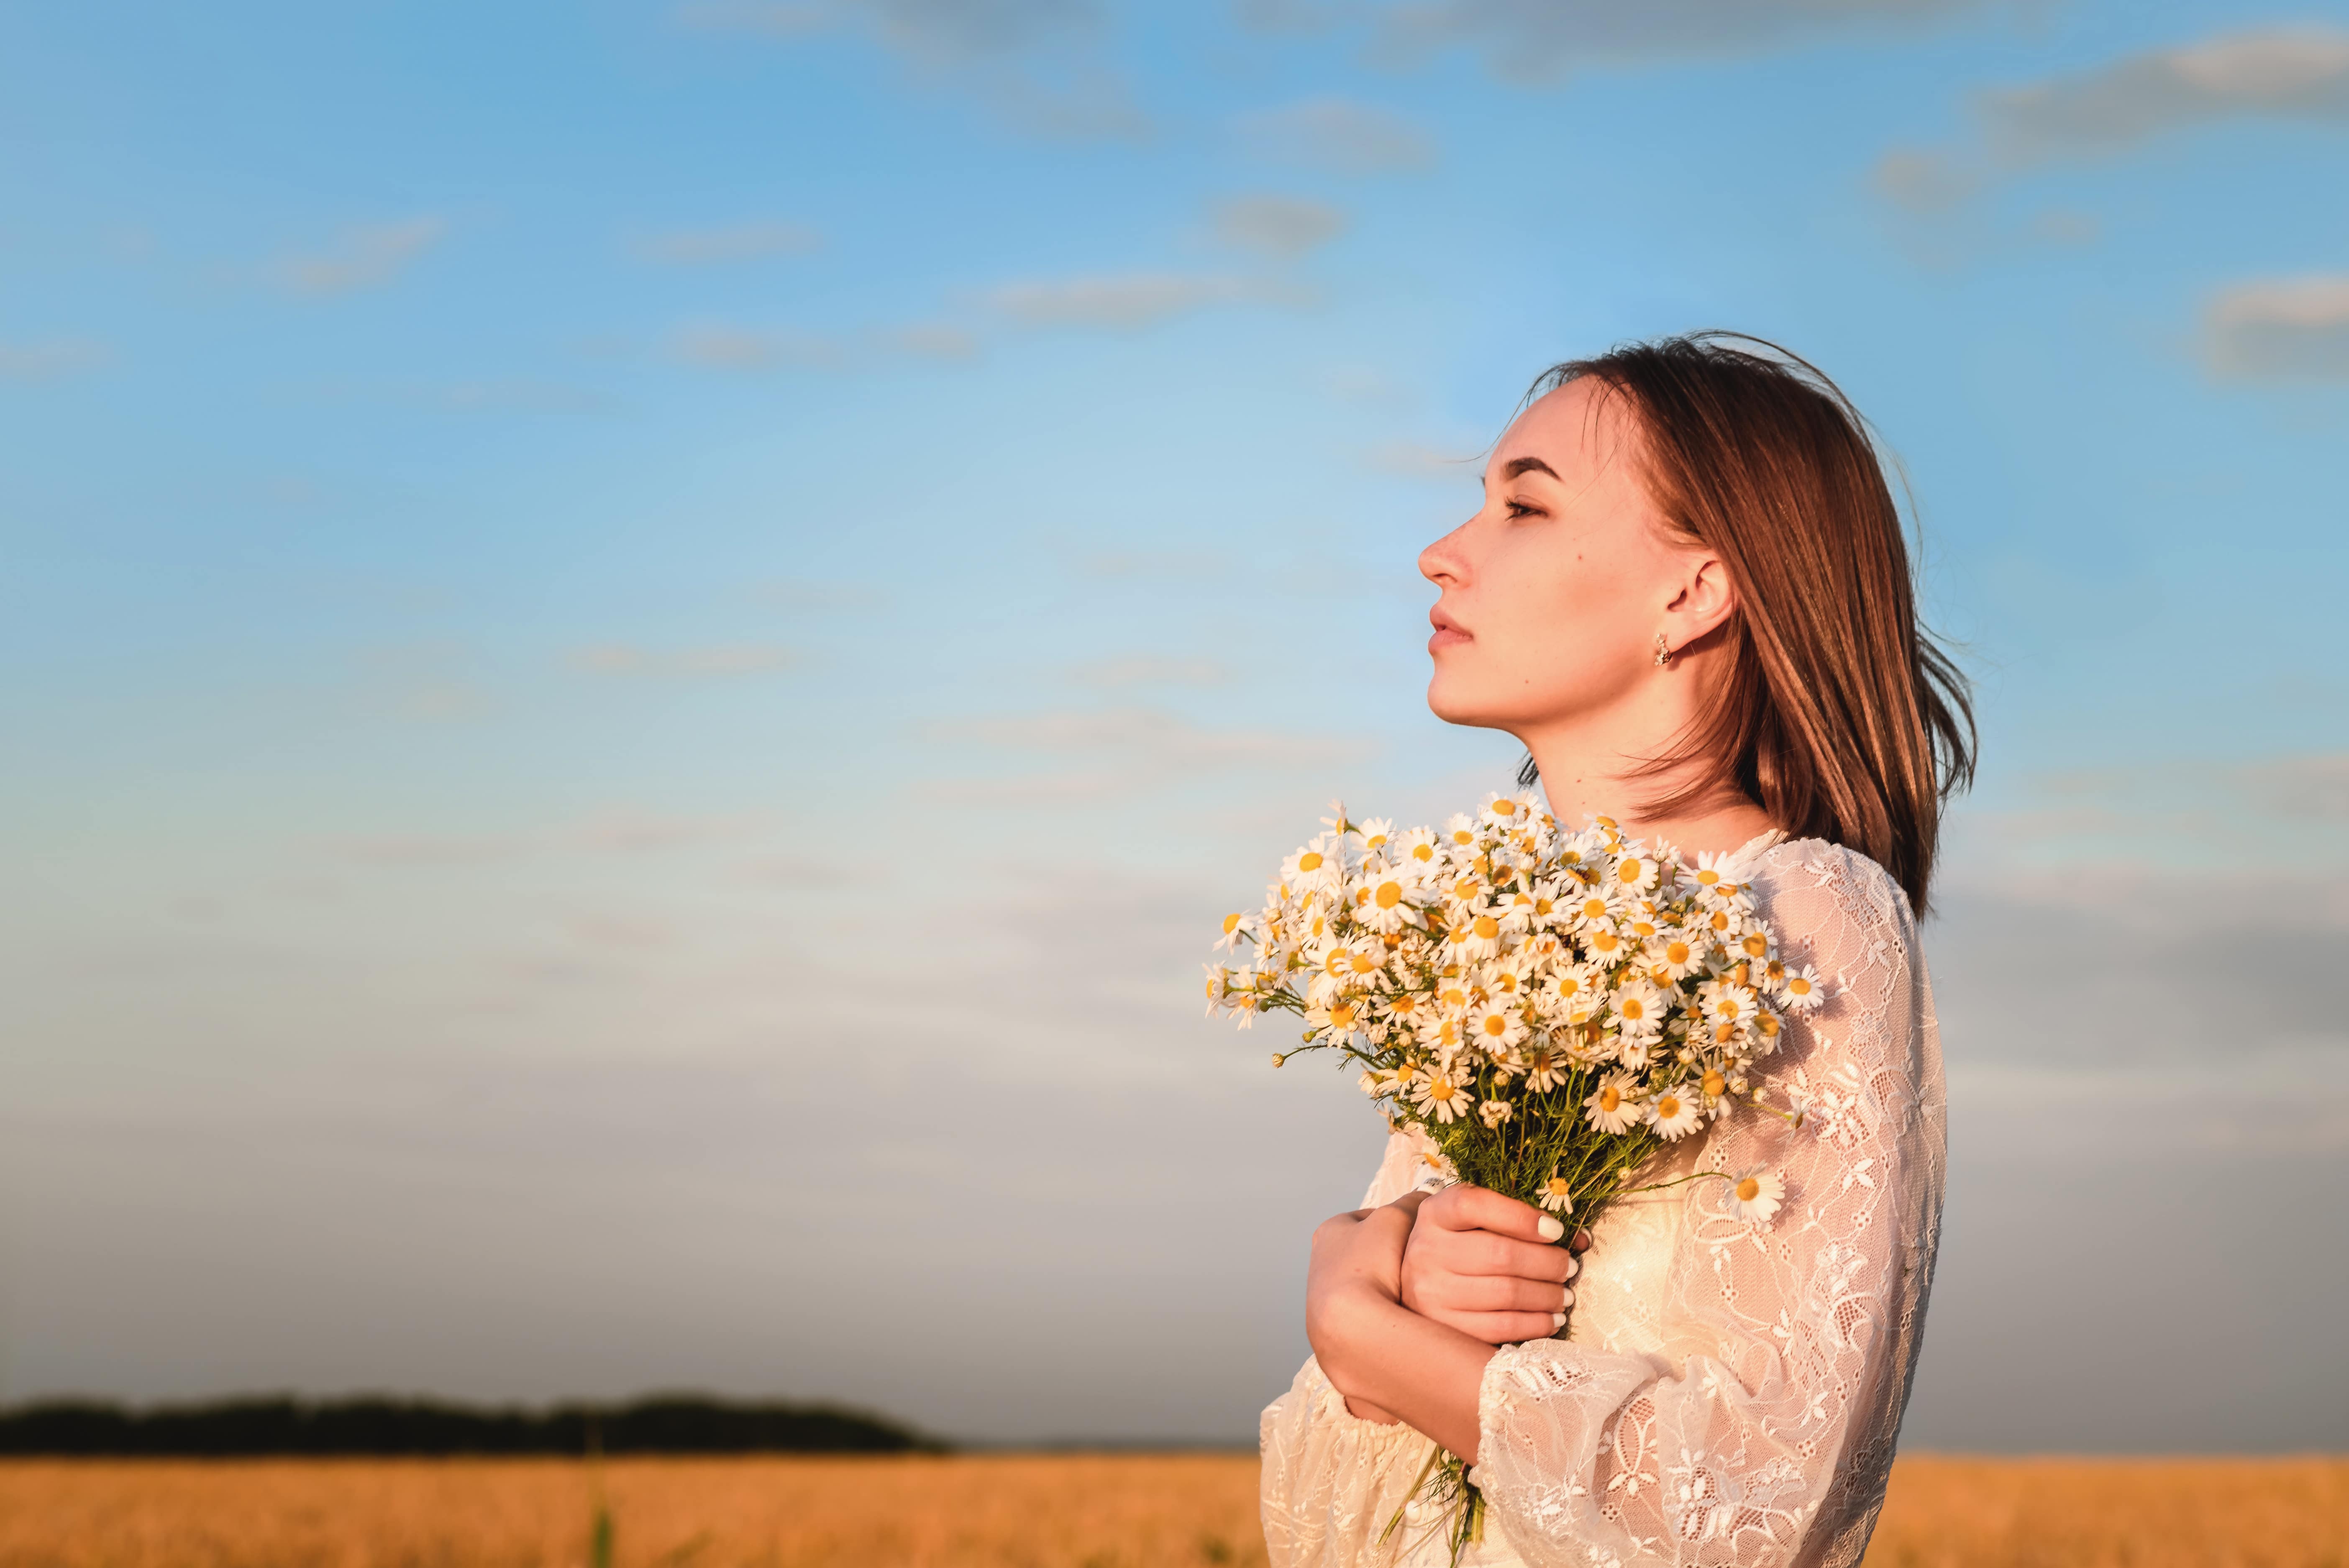 Beautiful woman in a white dress with a bouquet of flowers in a wheat field at sunset.